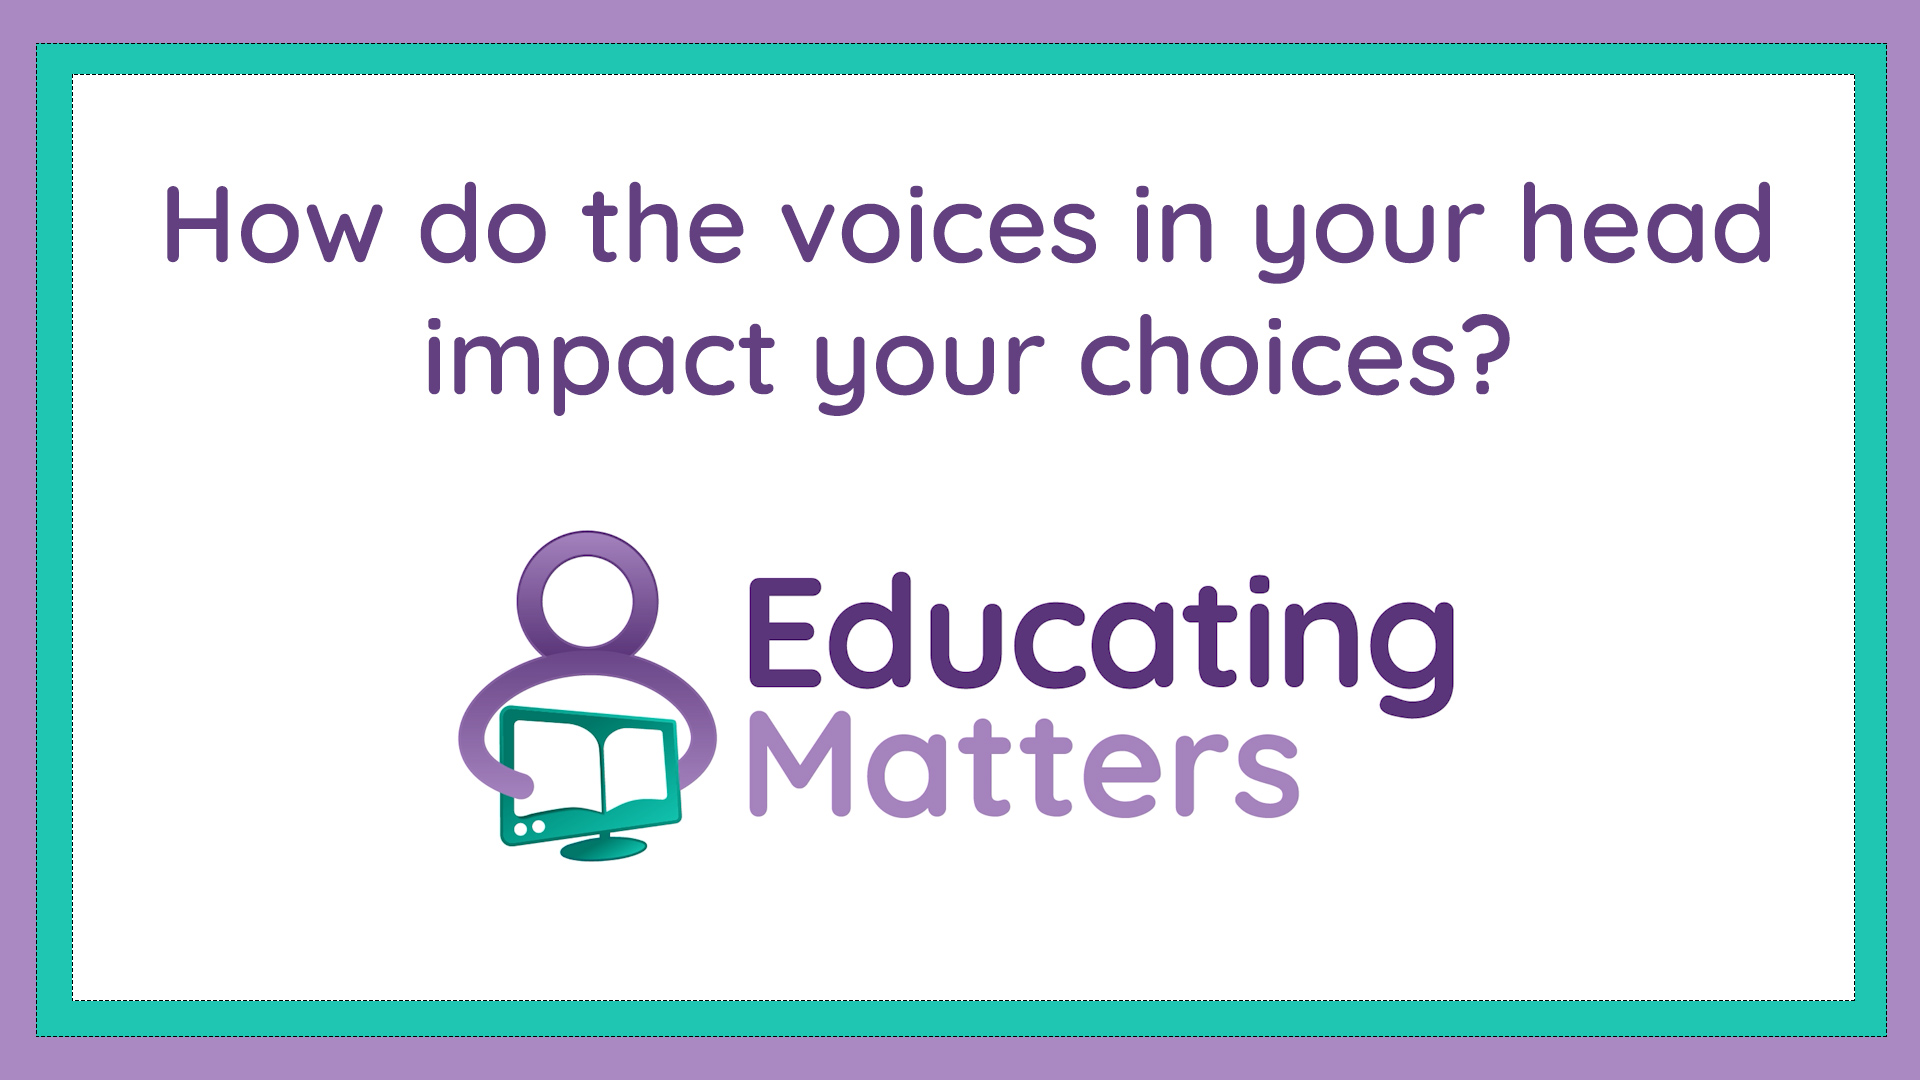 How do the voices in your head impact your choices?